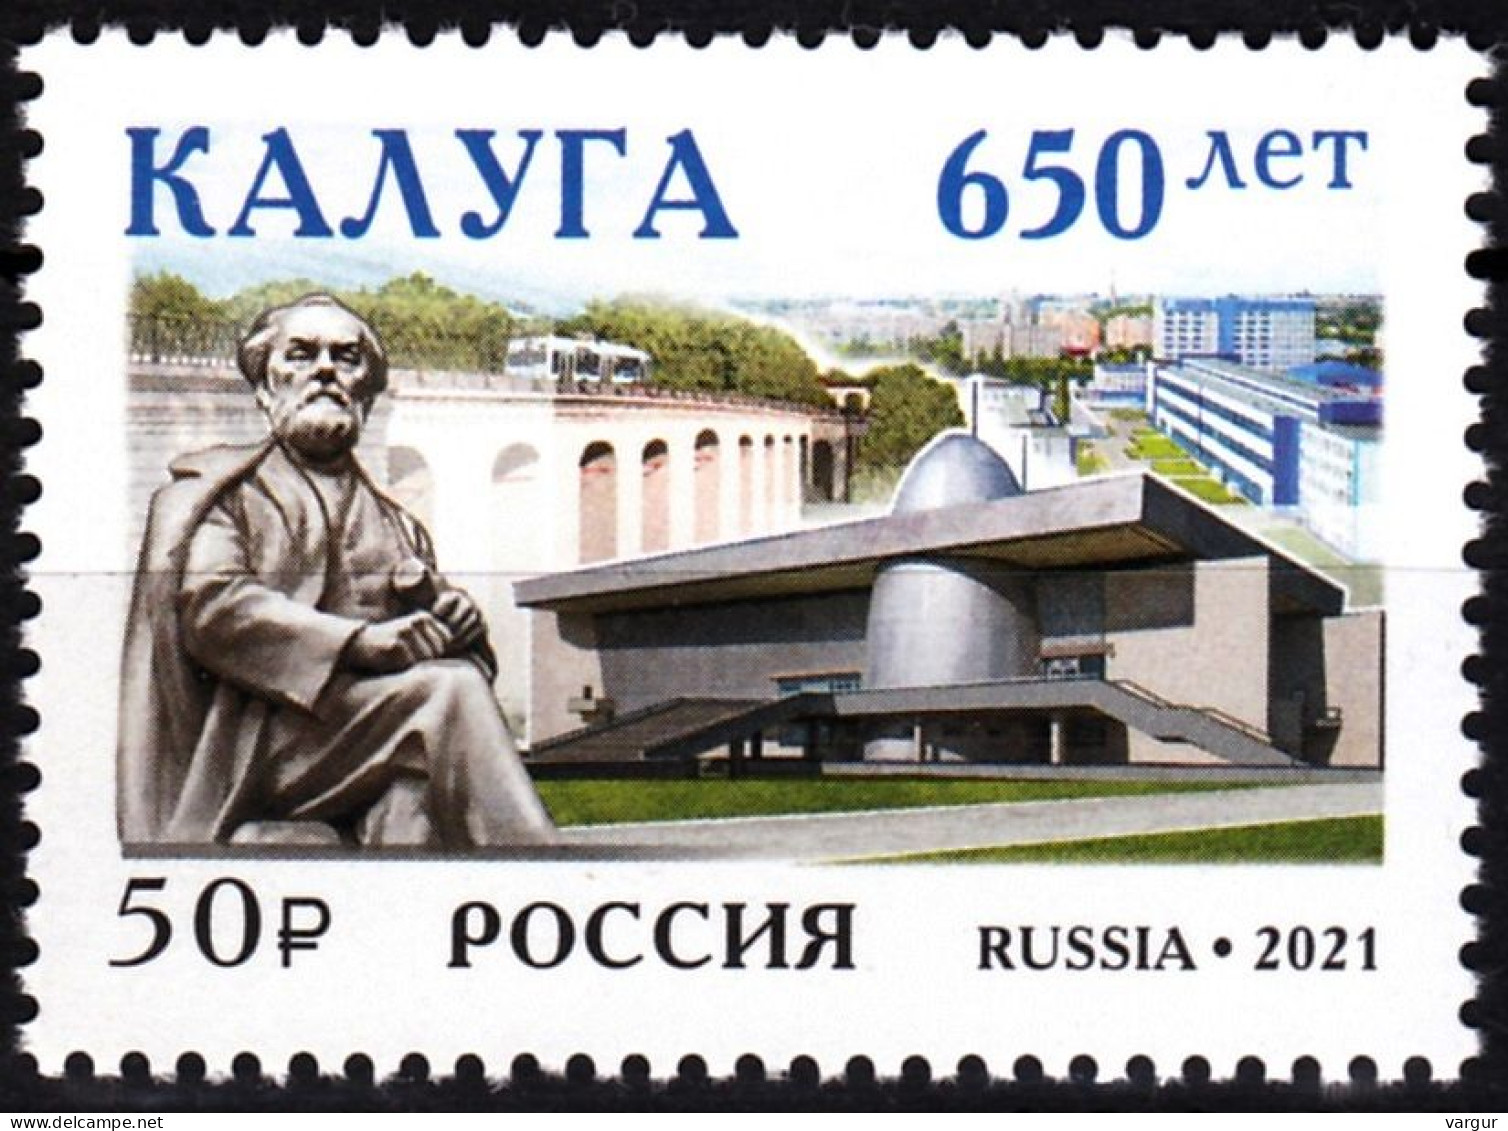 RUSSIA 2021-47 Architecture Space Monument. Kaluga Town - 650, MNH - Russia & USSR